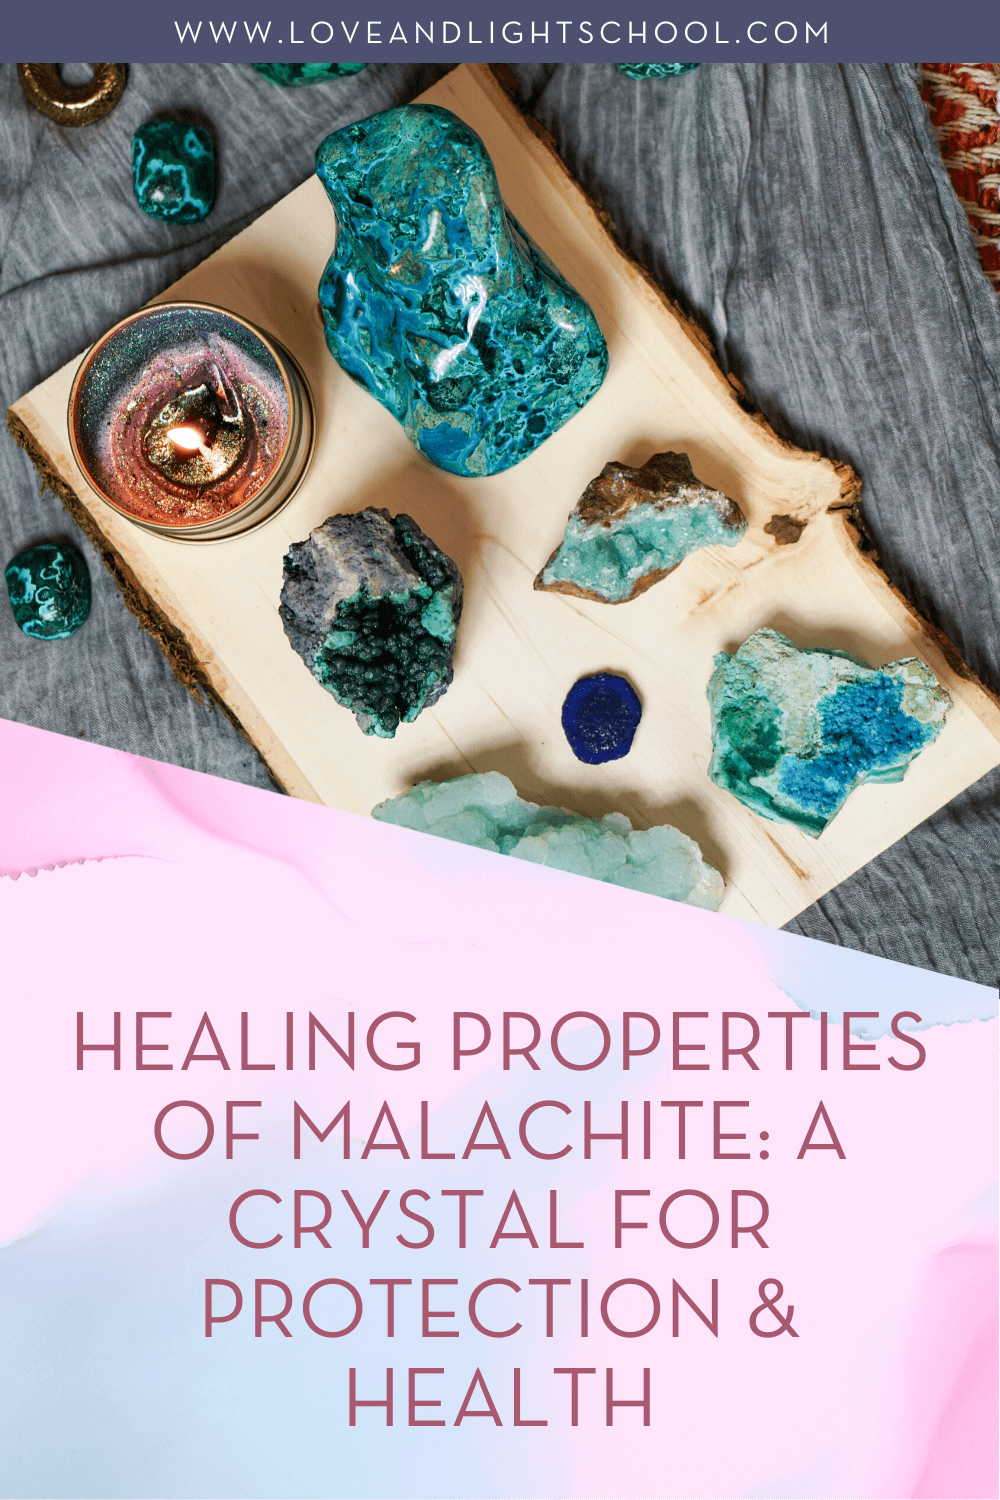 Healing Properties of Malachite: A Crystal for Protection & Health